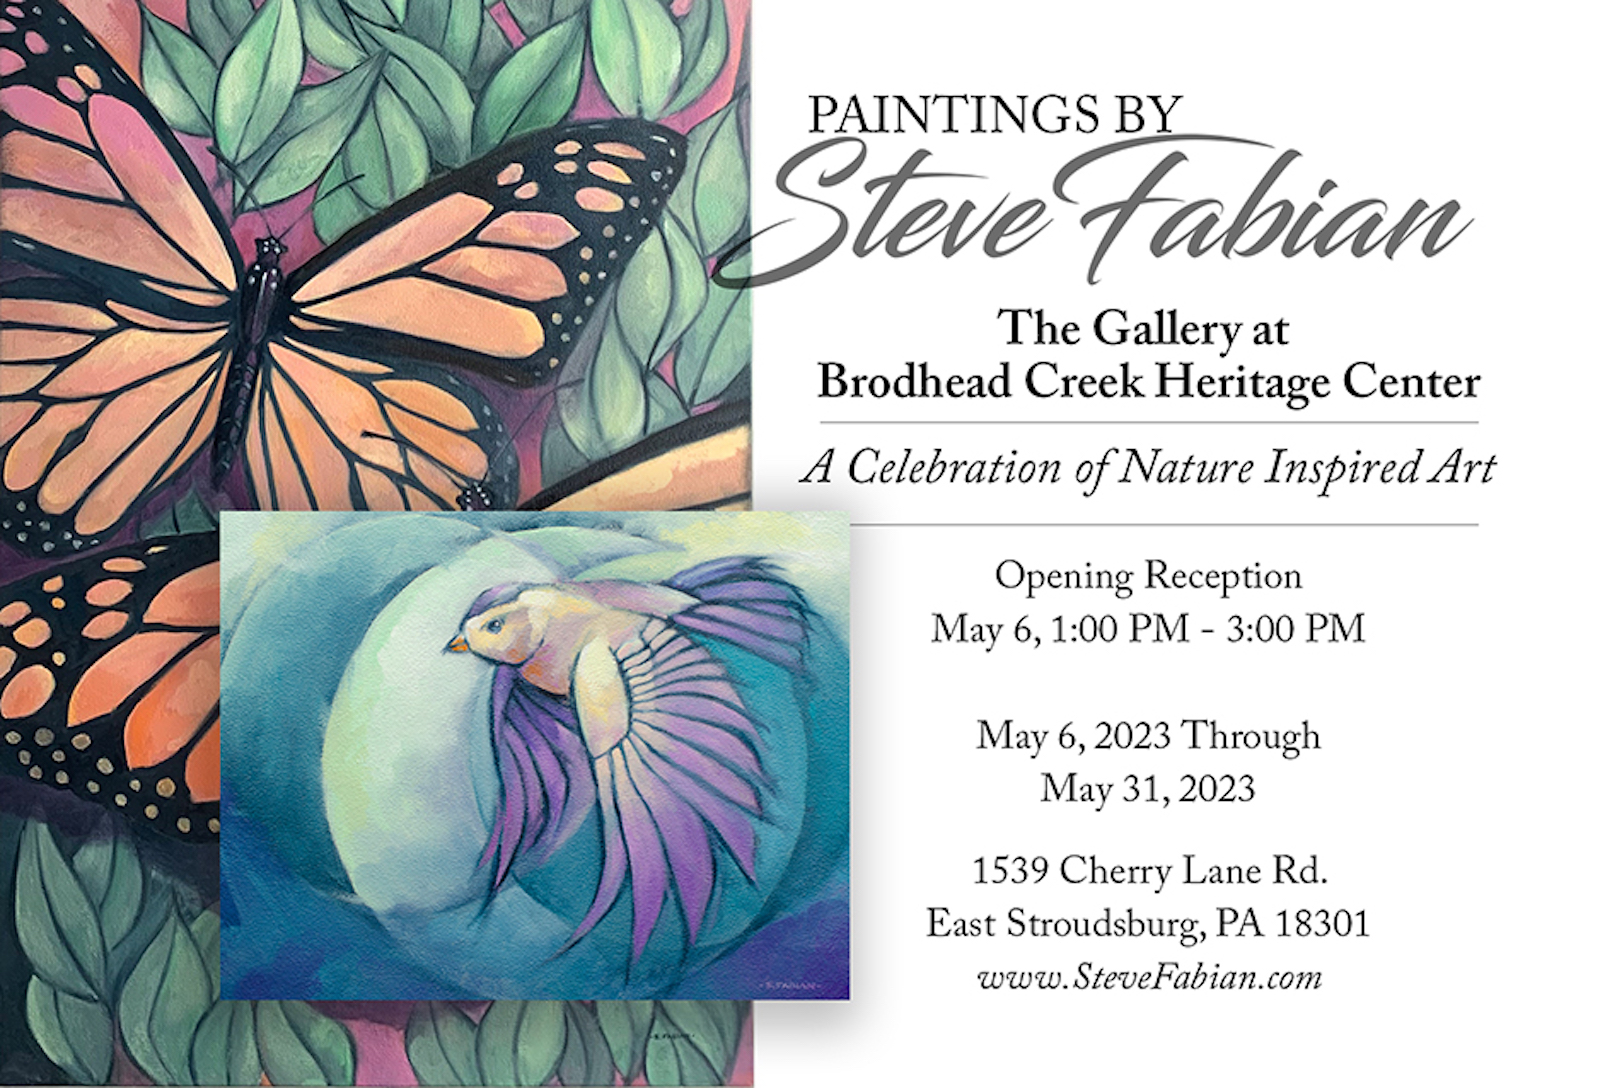 PAINTINGS BY
Steve Fabian
The Gallery at
Brodhead Creek Heritage Center
A Celebration of Nature Inspired Art
Opening Reception
May 6, 1:00 PM - 3:00 PM
May 6, 2023 Through
May 31, 2023
1539 Cherry Lane Rd.
East Stroudsburg, PA 18301
www.SteveFabian.com